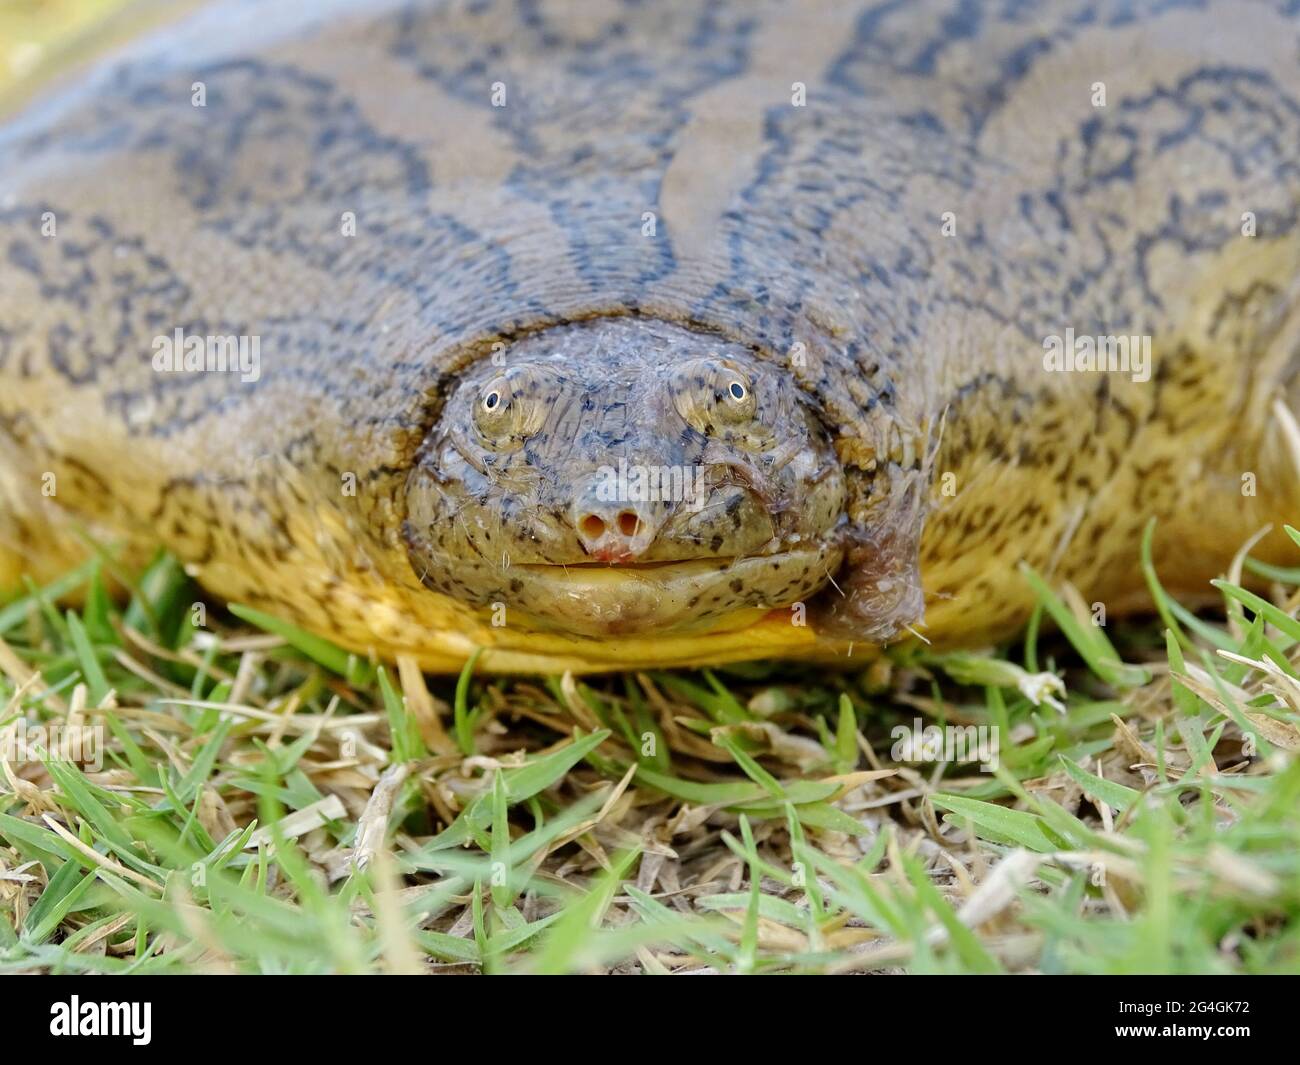 Indian narrow-headed softshell turtle, Chitra indica.  Endangered. Found in rivers of the Indian Subcontinent.  Chambal region, India Stock Photo